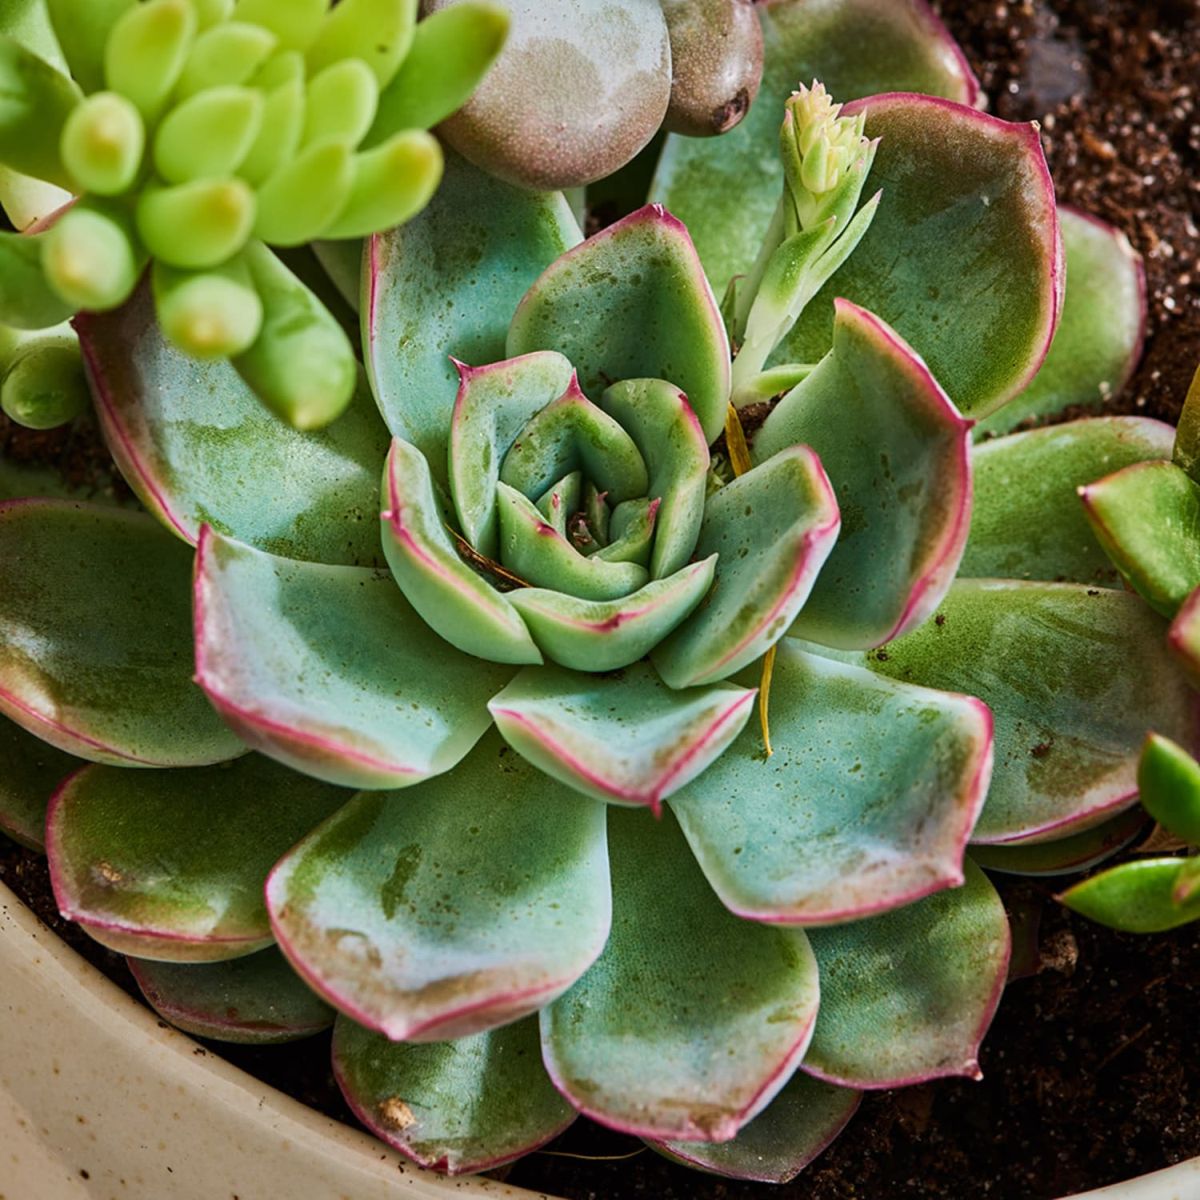 Echeveria (Hens and chicks or Mexican Rosette)